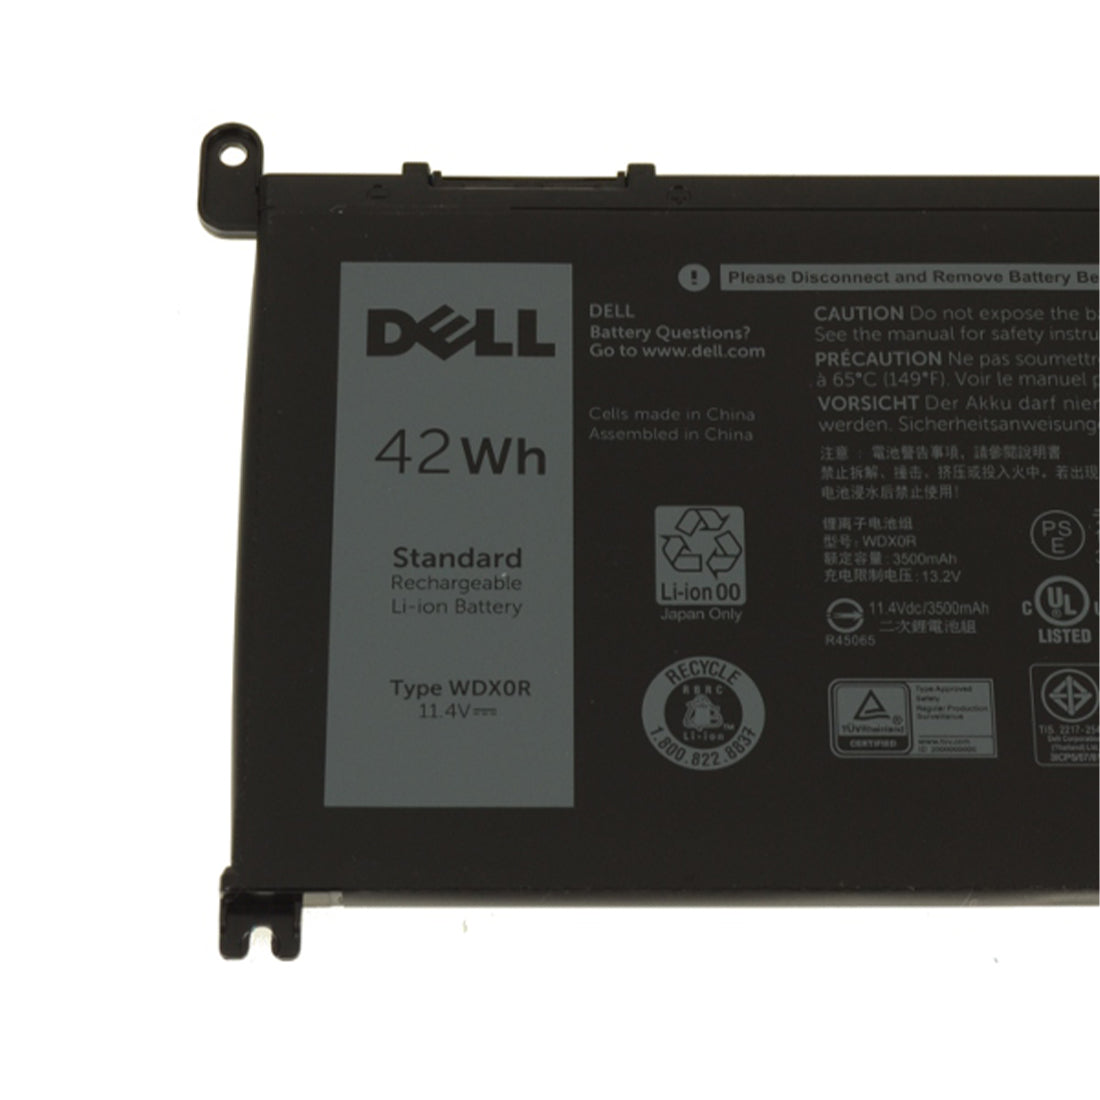 Dell Original 3500mAh 11.4V 42WHR 3-Cell Replacement Laptop Battery for Latitude 3500